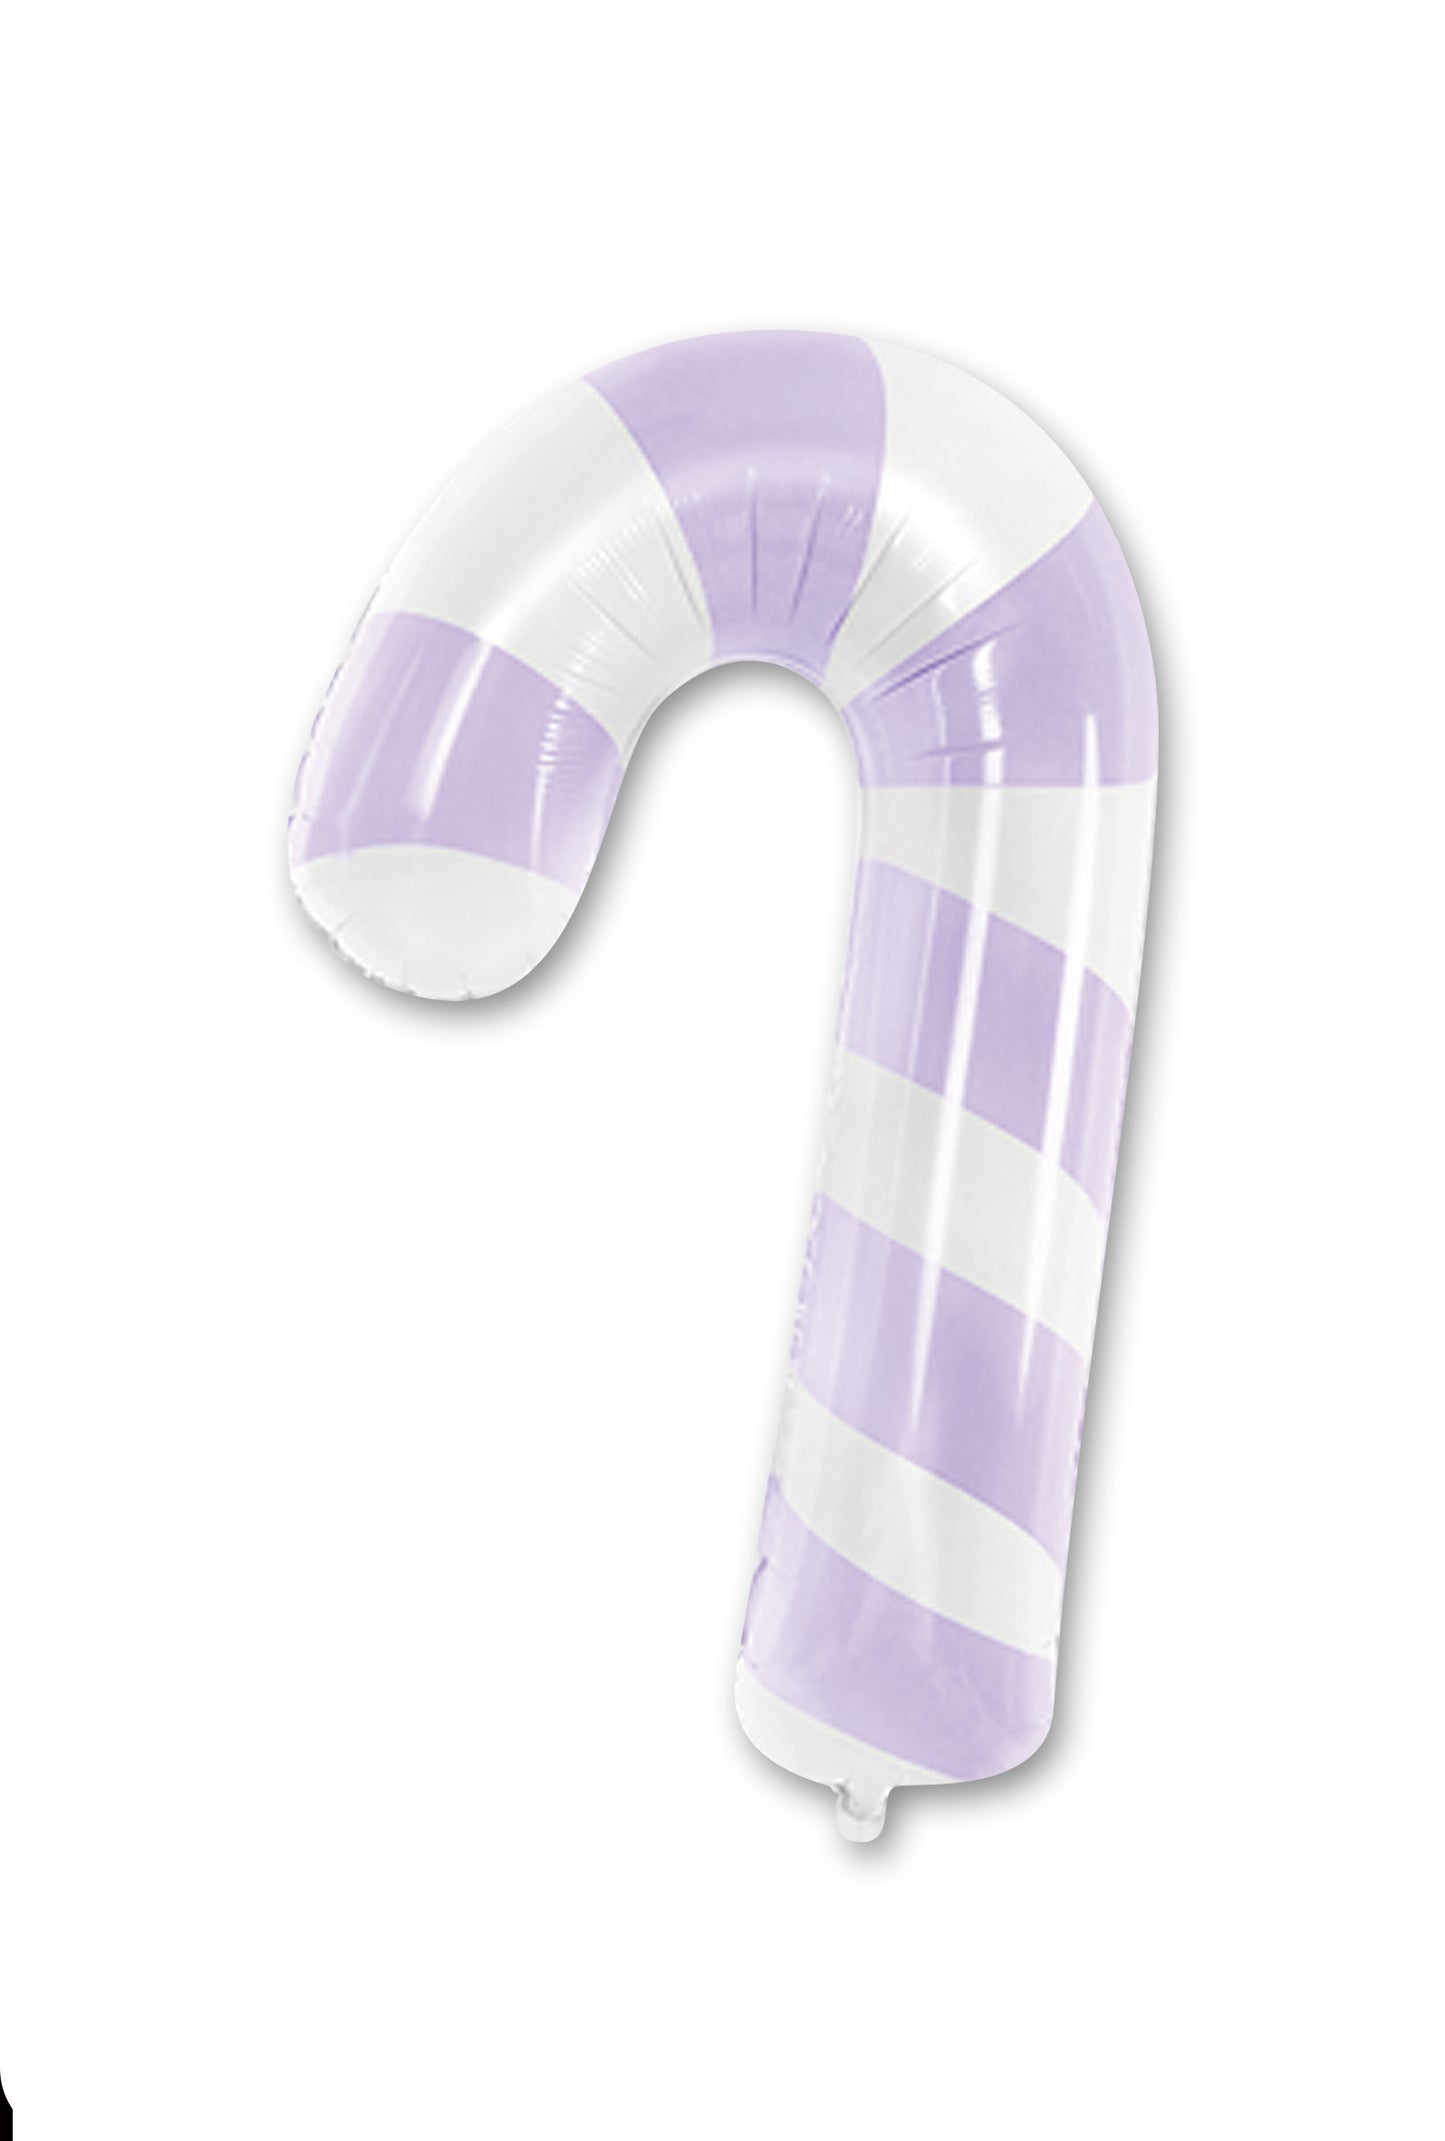 Winner Party 30" Lavender Candy Cane